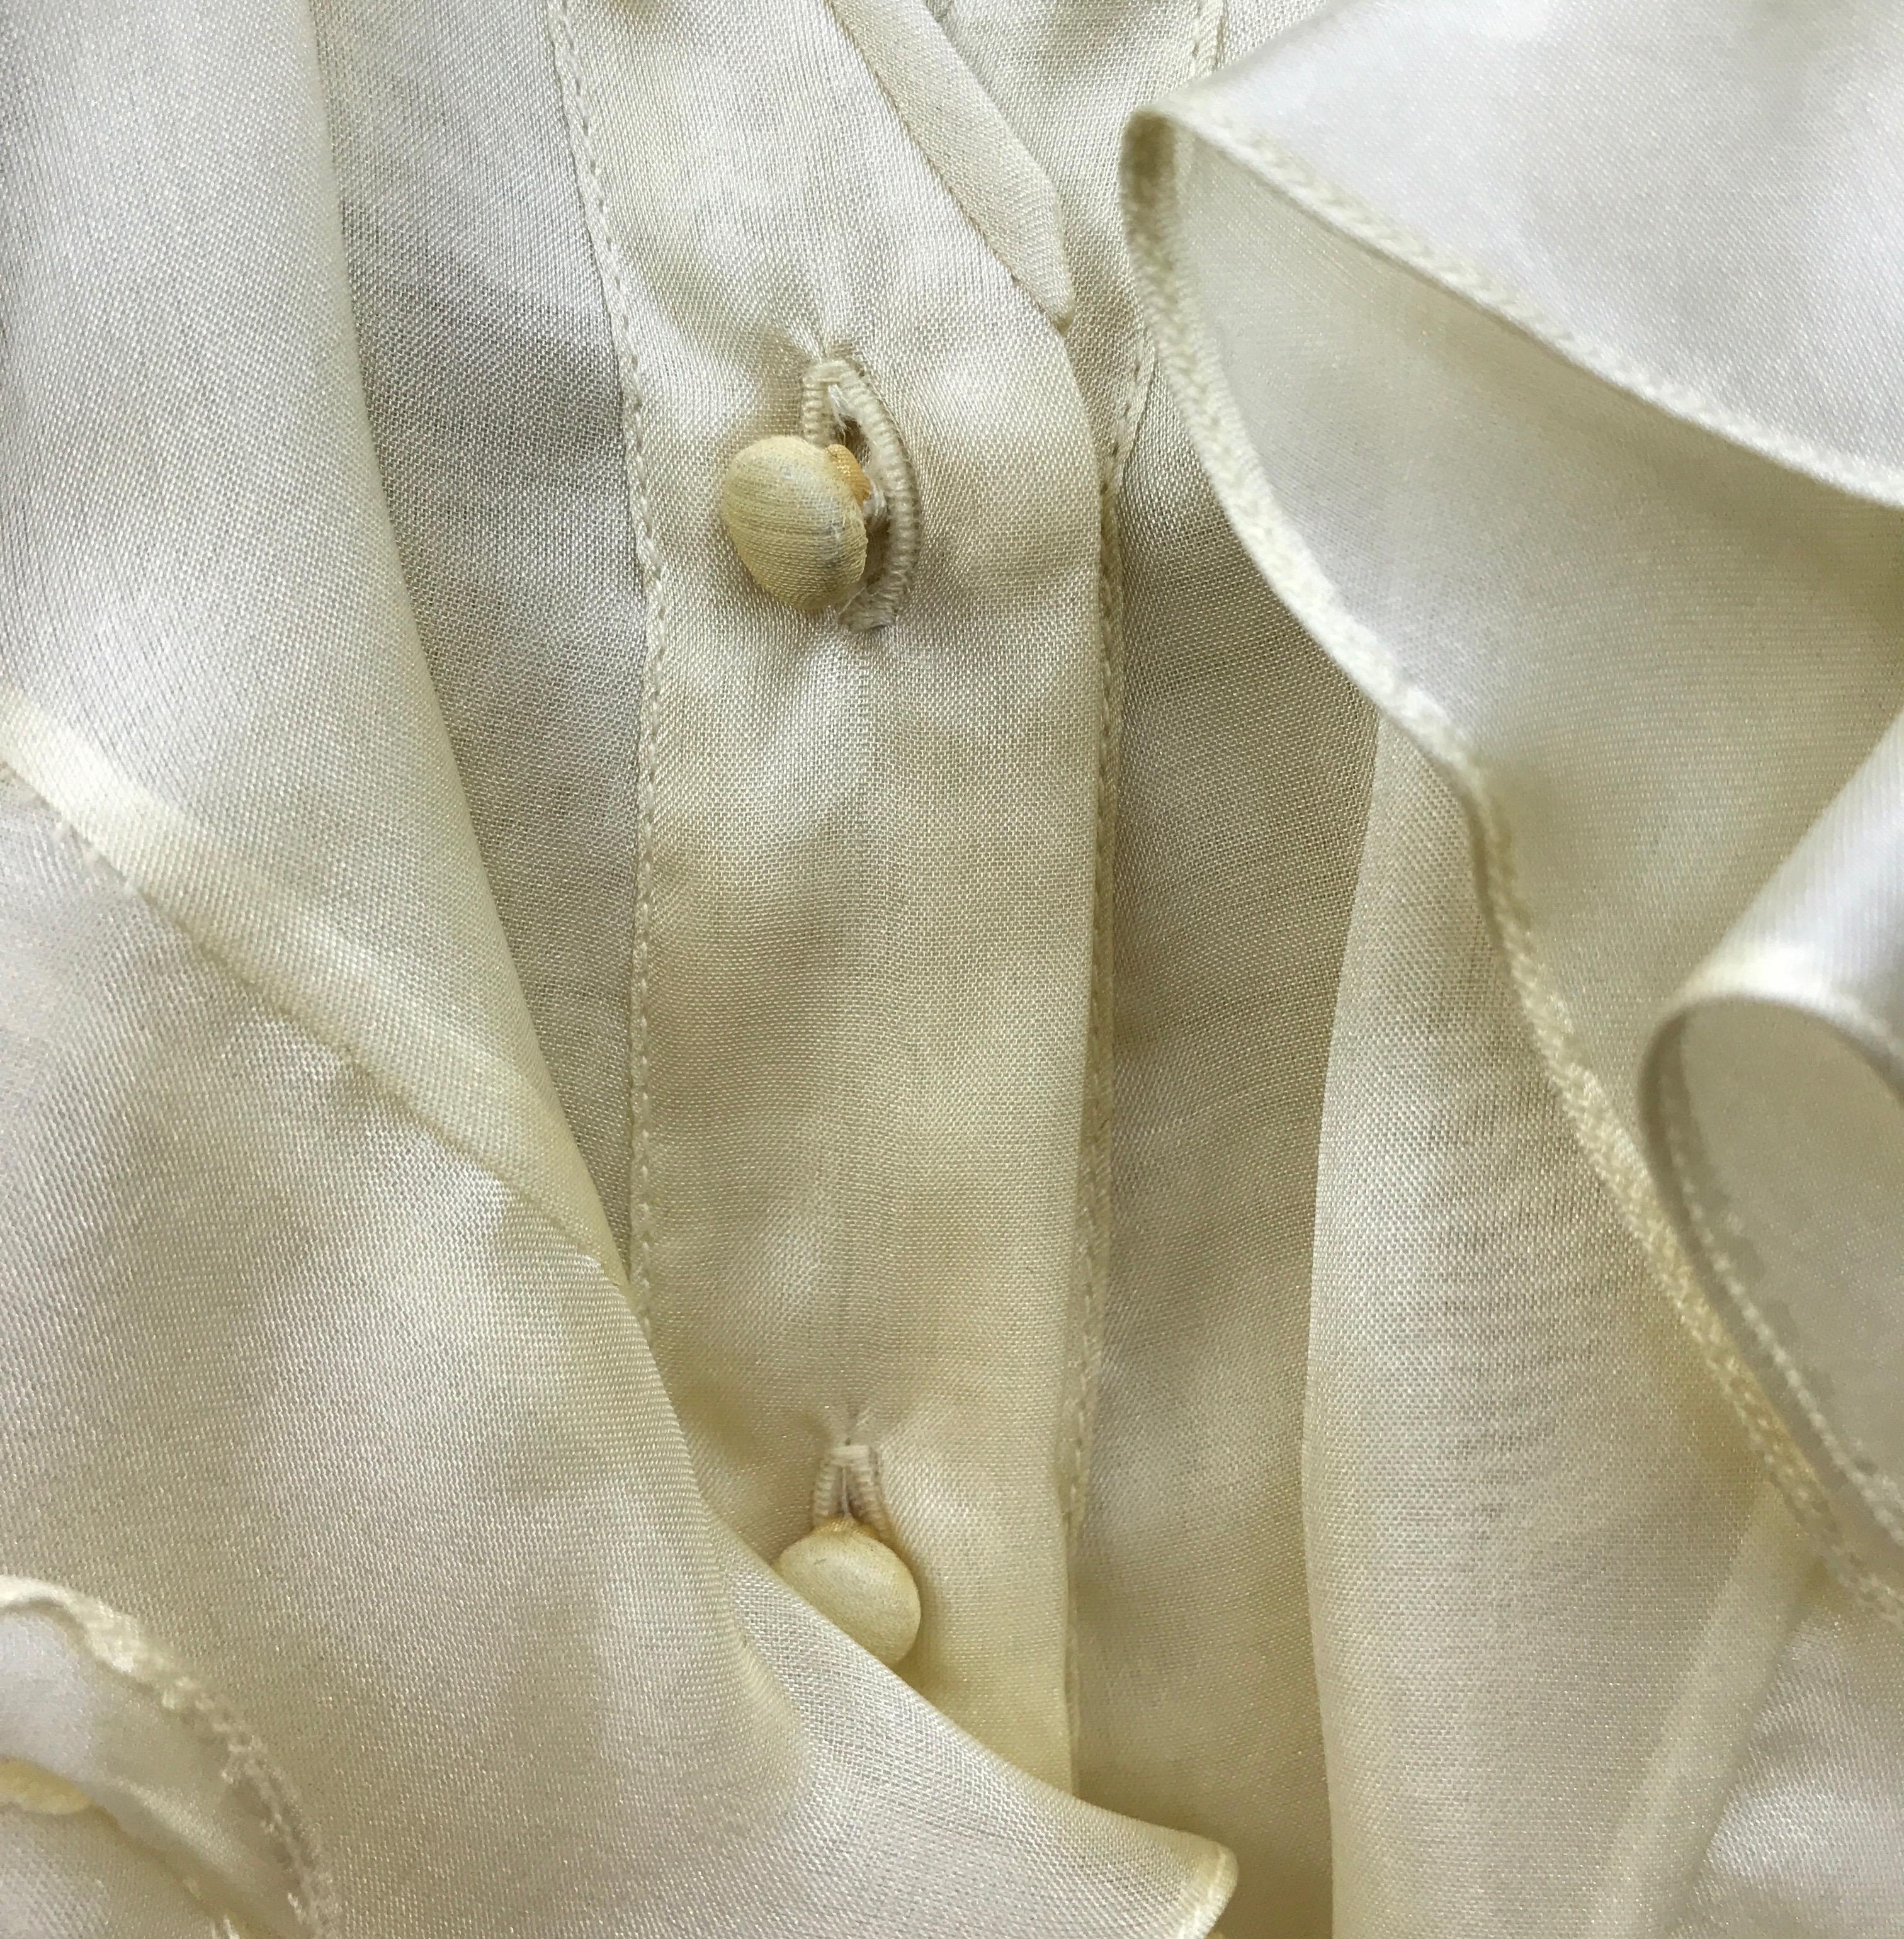 Oscar De La Renta Pale Yellow Silk Sleeveless Top-6 In Excellent Condition For Sale In West Palm Beach, FL